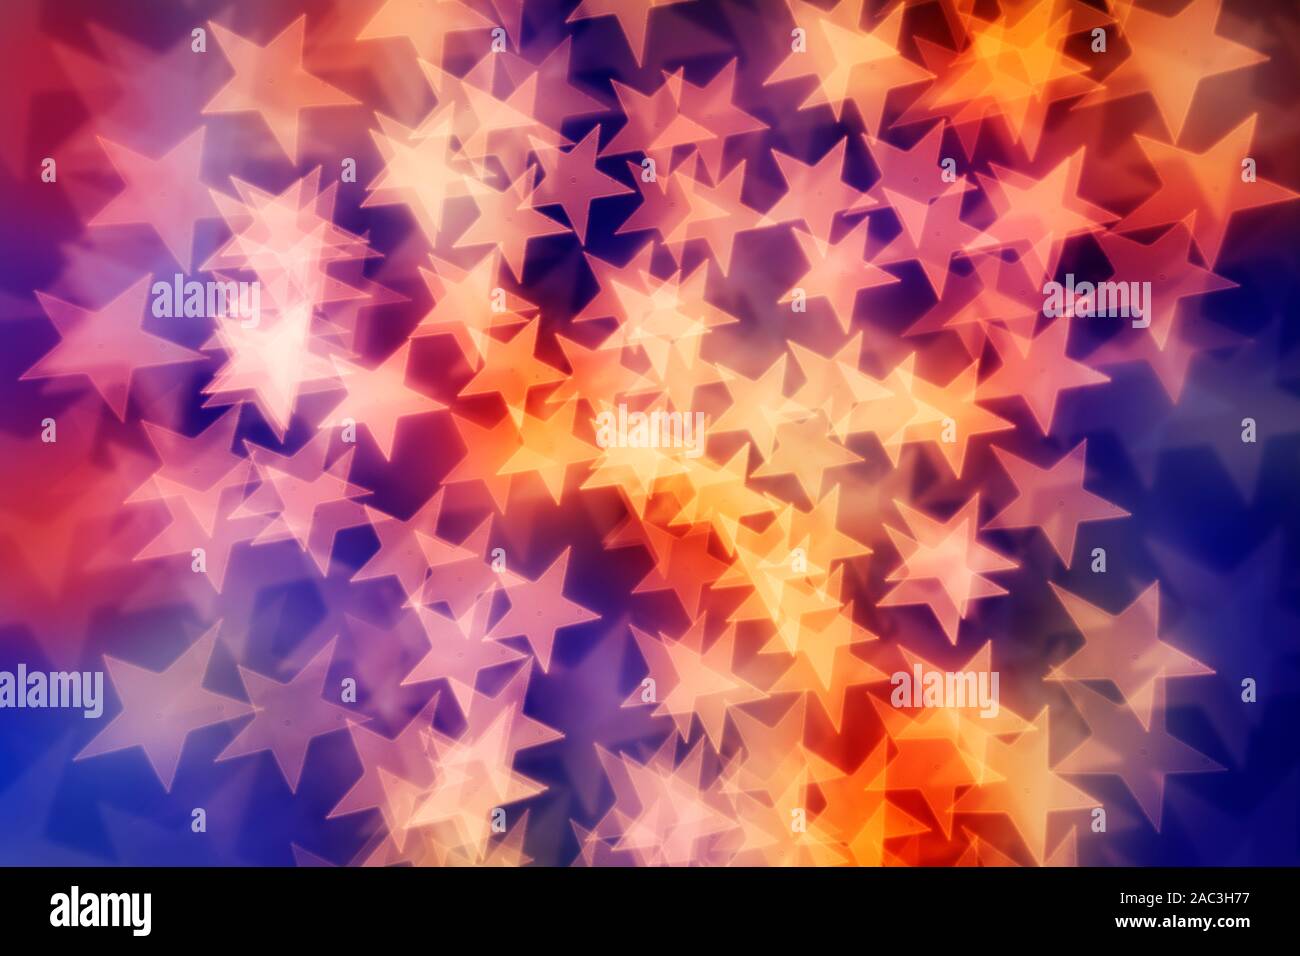 Star shaped bokeh background in yellow, reds and purple tones. Stock Photo